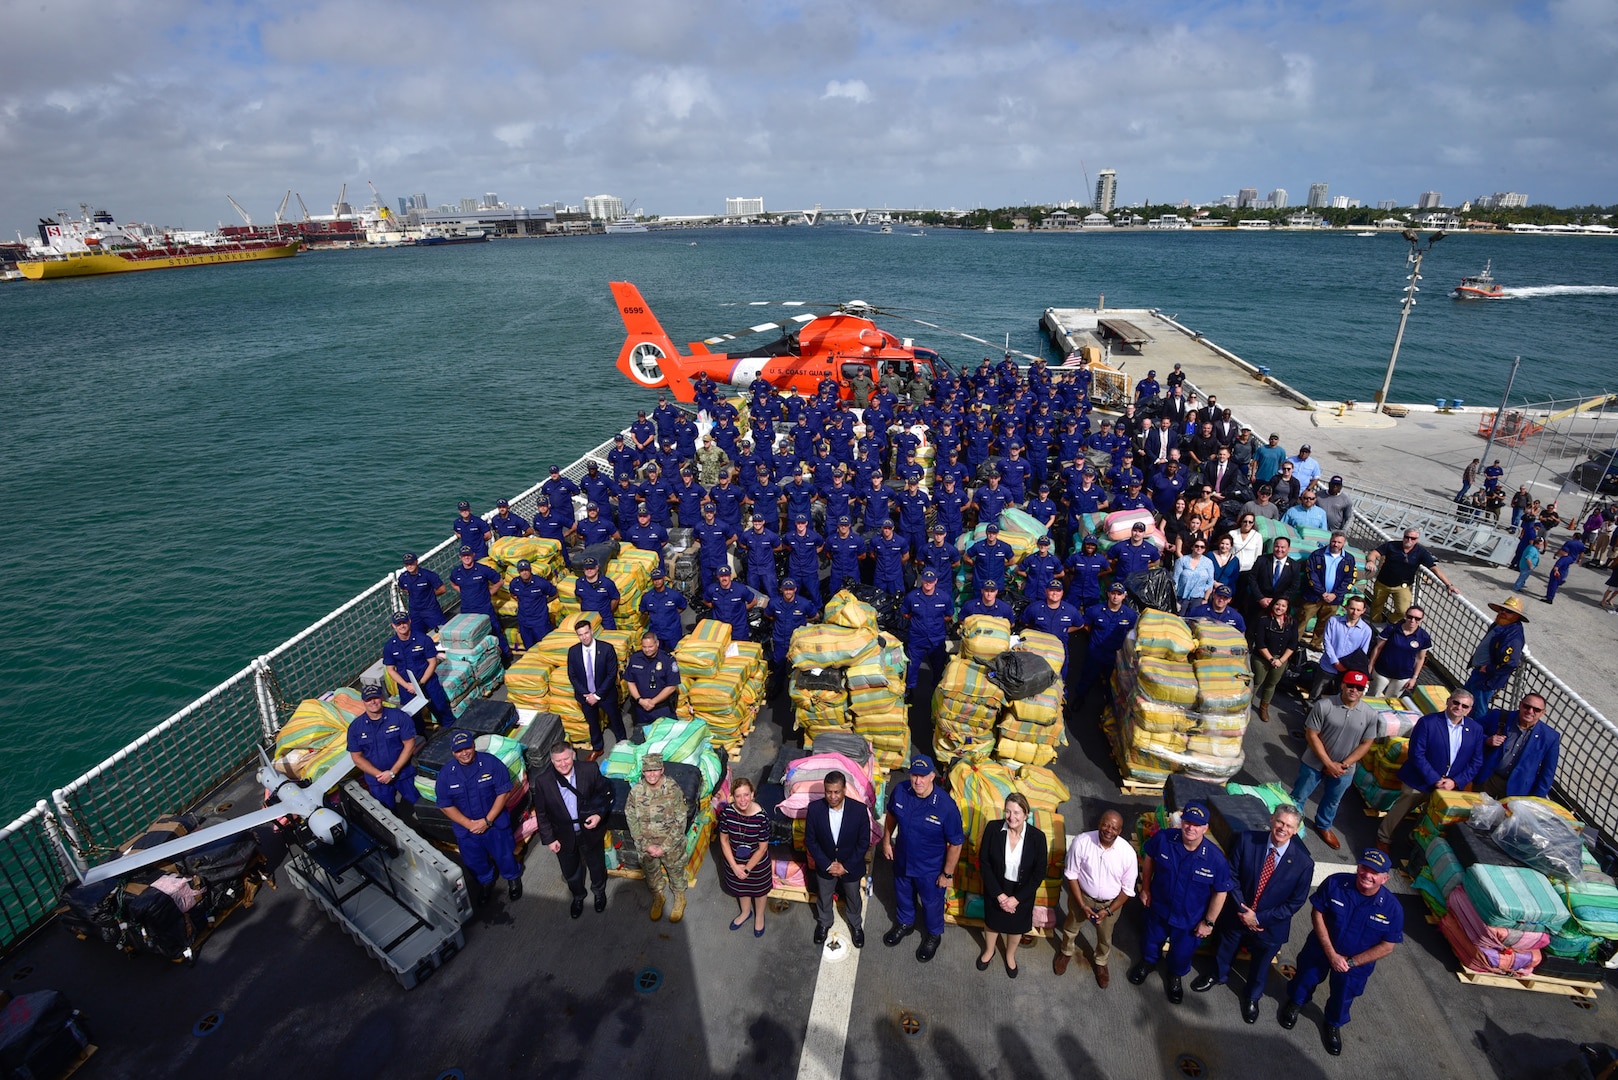 Group photo of Coast Guard personnel posing with $1.06 billion in illegal narcotics.